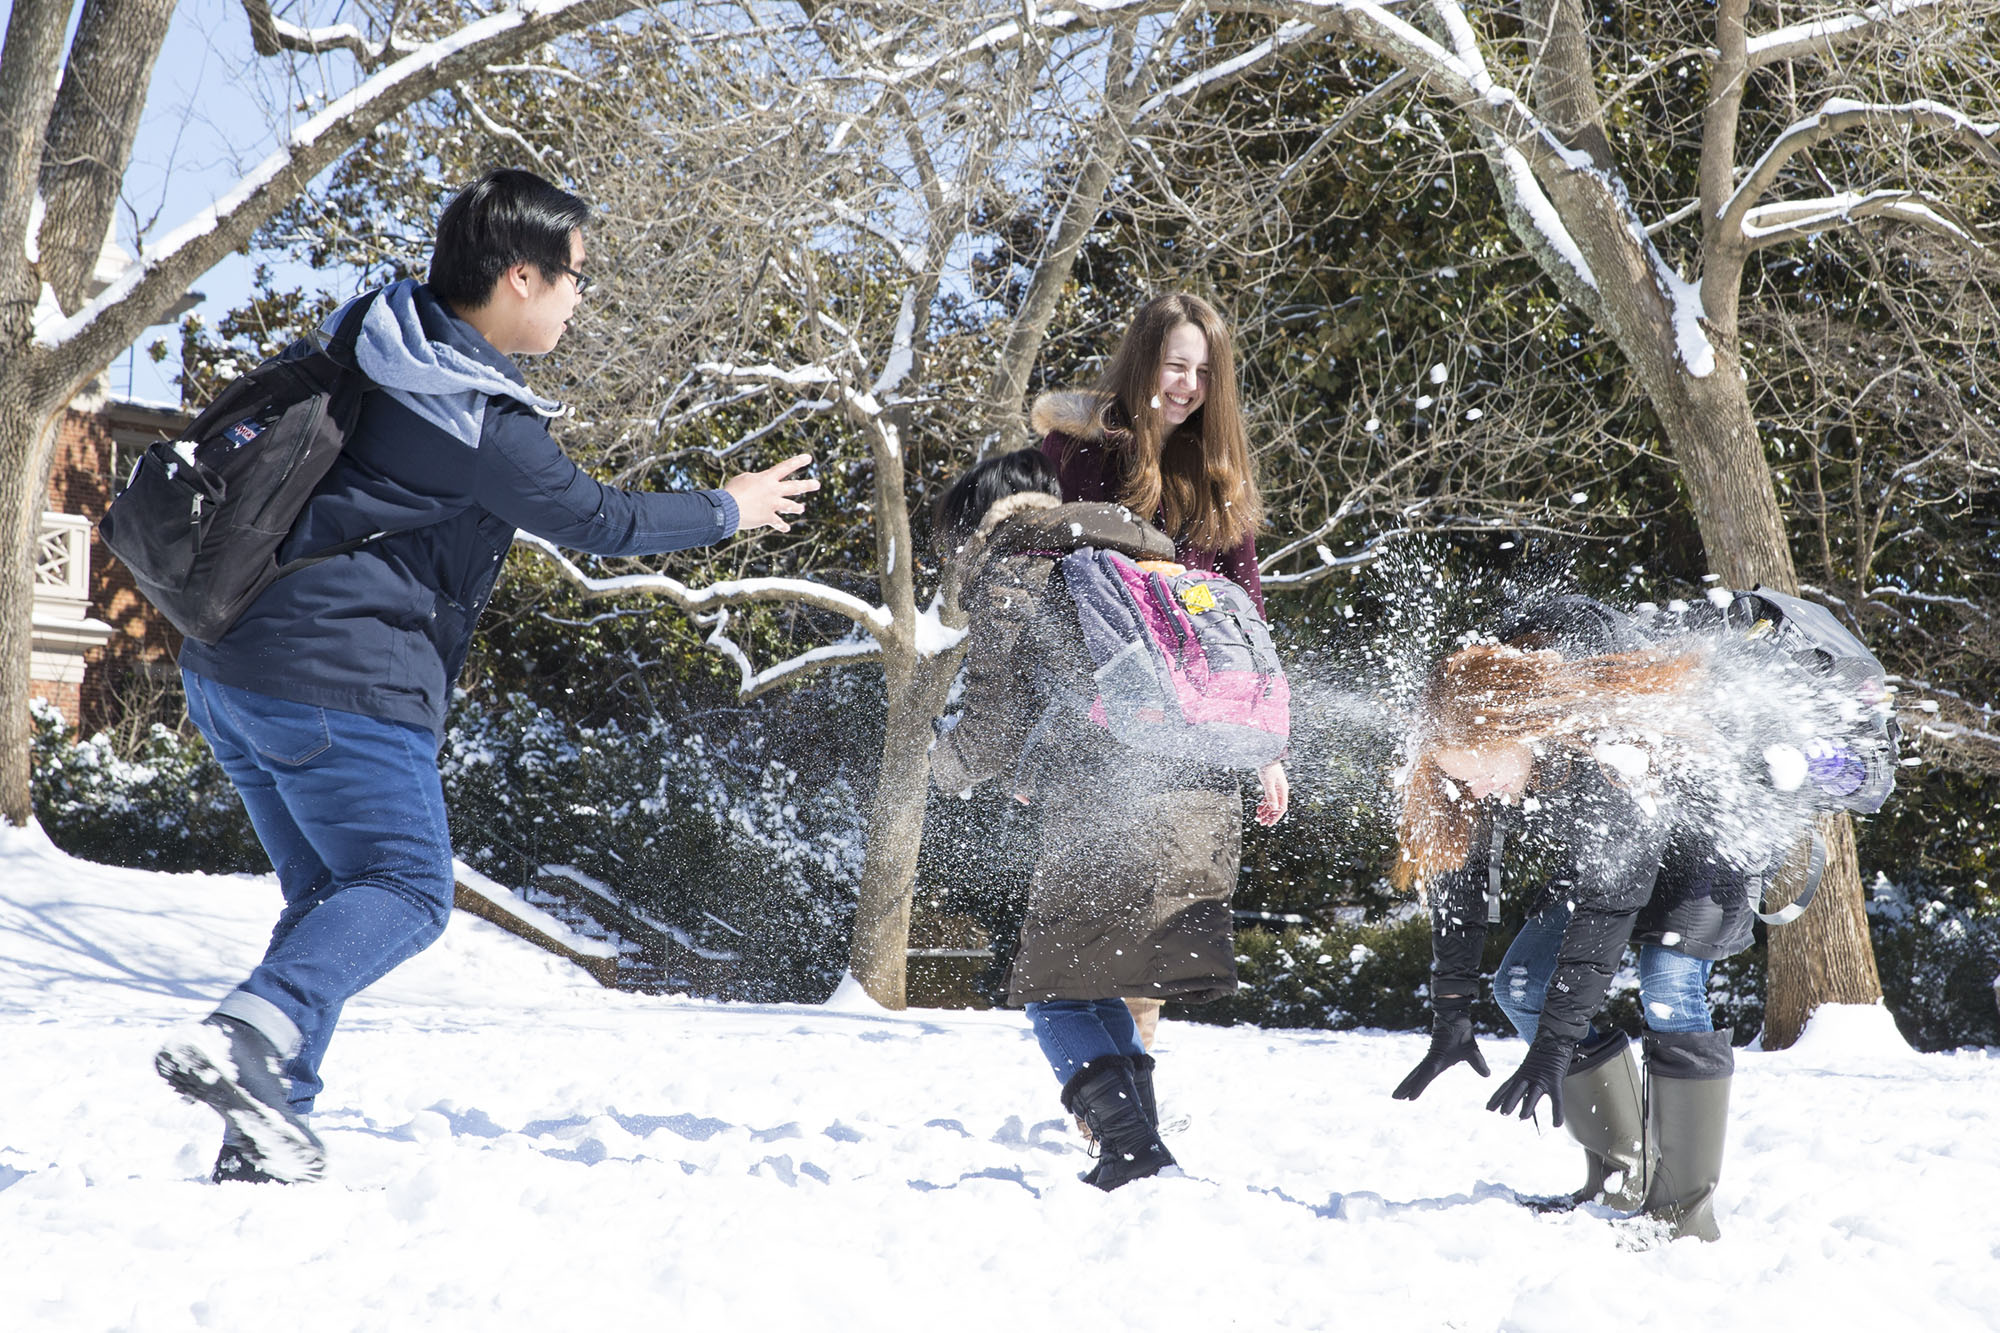 Students on grounds having a snowball fight